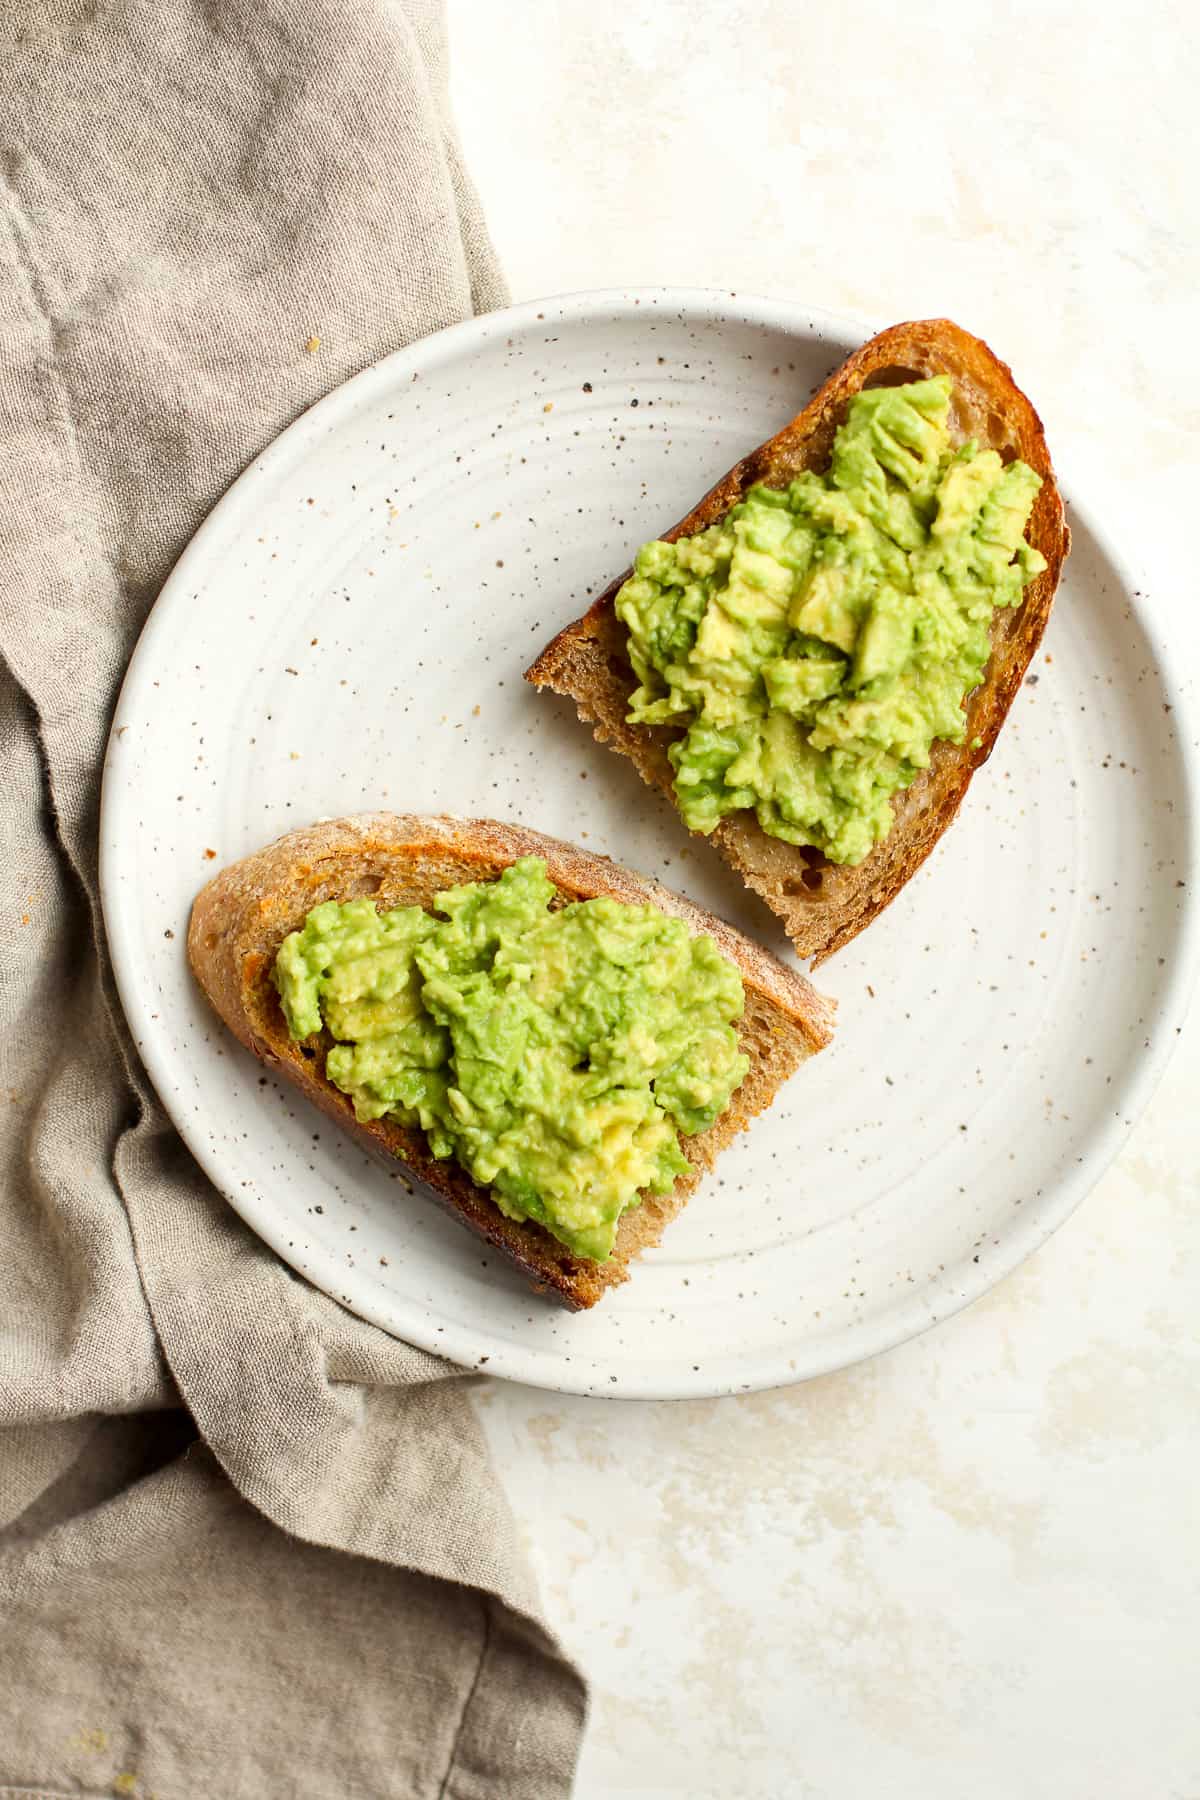 A plate with two halves multigrain toast with smashed avocado.